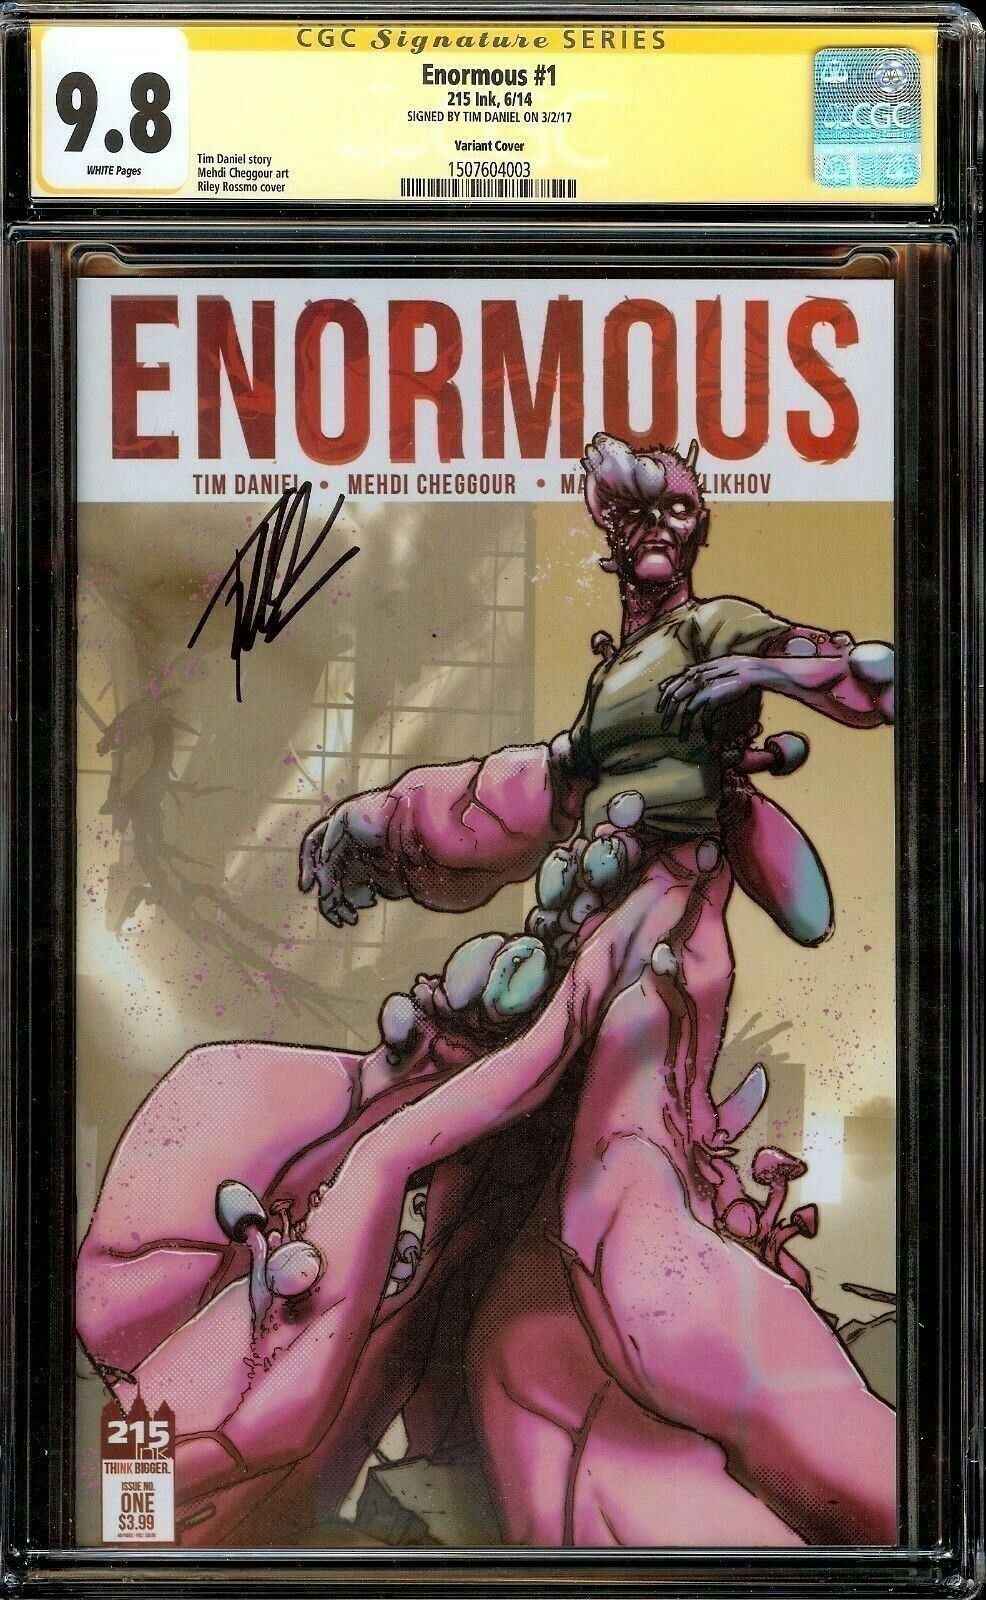 ENORMOUS #1 CGC 9.8 SS x1 SIGNED by TIM DANIEL VARIANT COVER TV SERIES NM/MT